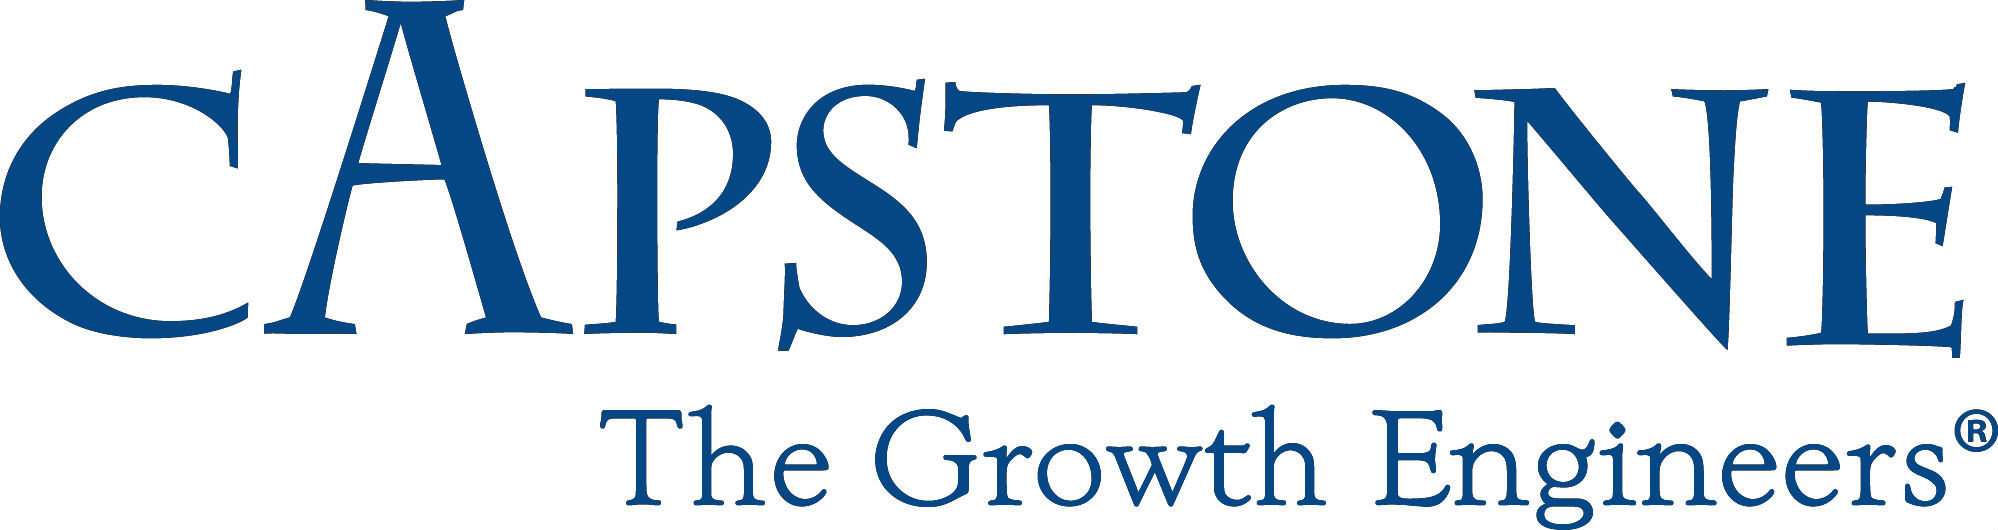 Capstone Strategic is the leading M&A advisory firm for the middle market specializing in not-for-sale acquisitions and corporate growth strategies.